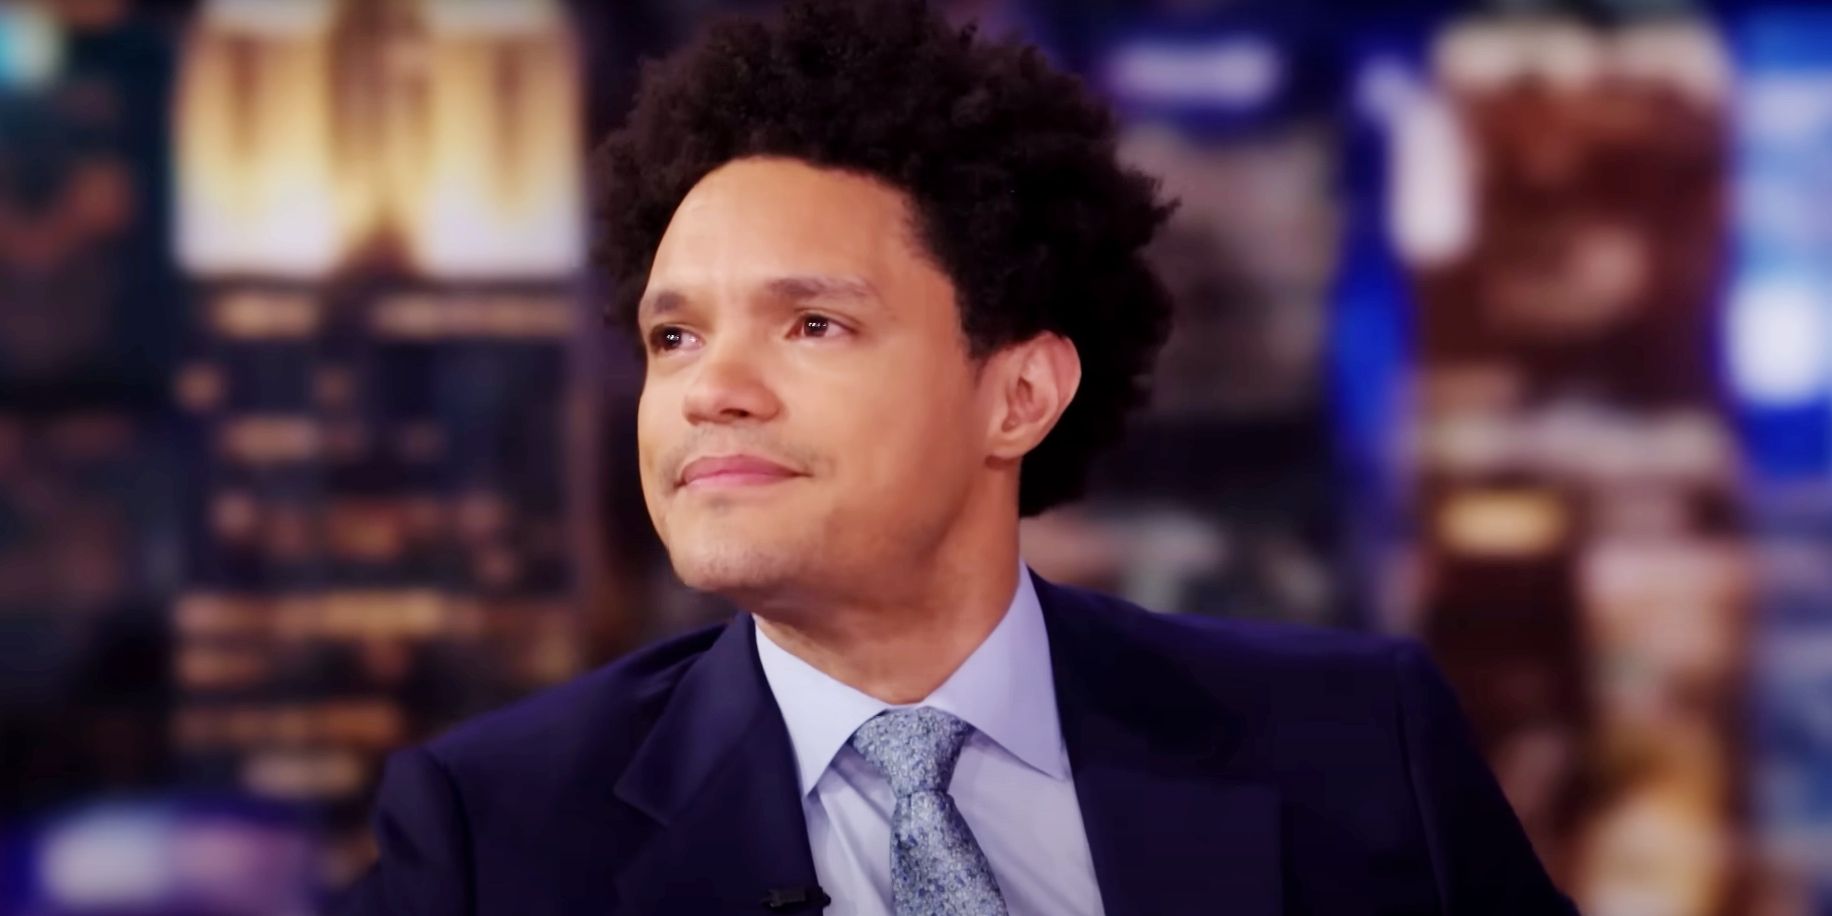 Trevor Noah says goodbye to audience in final The Daily Show appearance